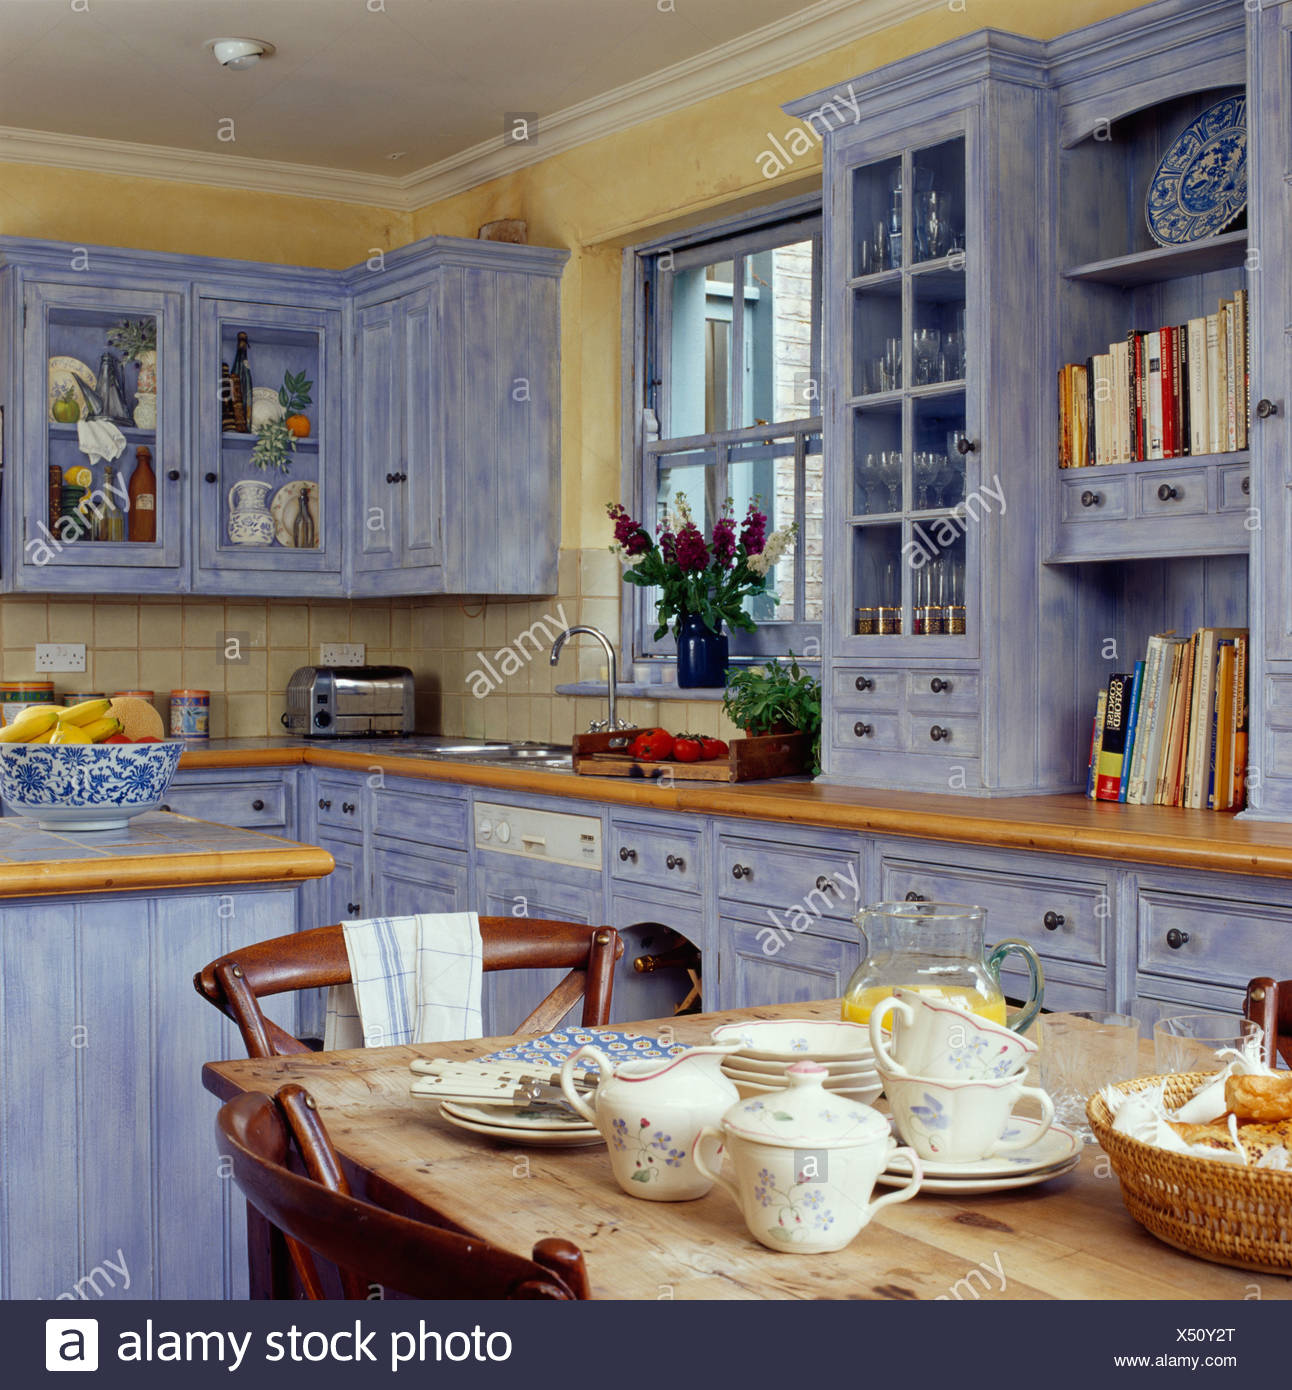 Crockery On Pine Table In Cottage Kitchen With Pale Blue